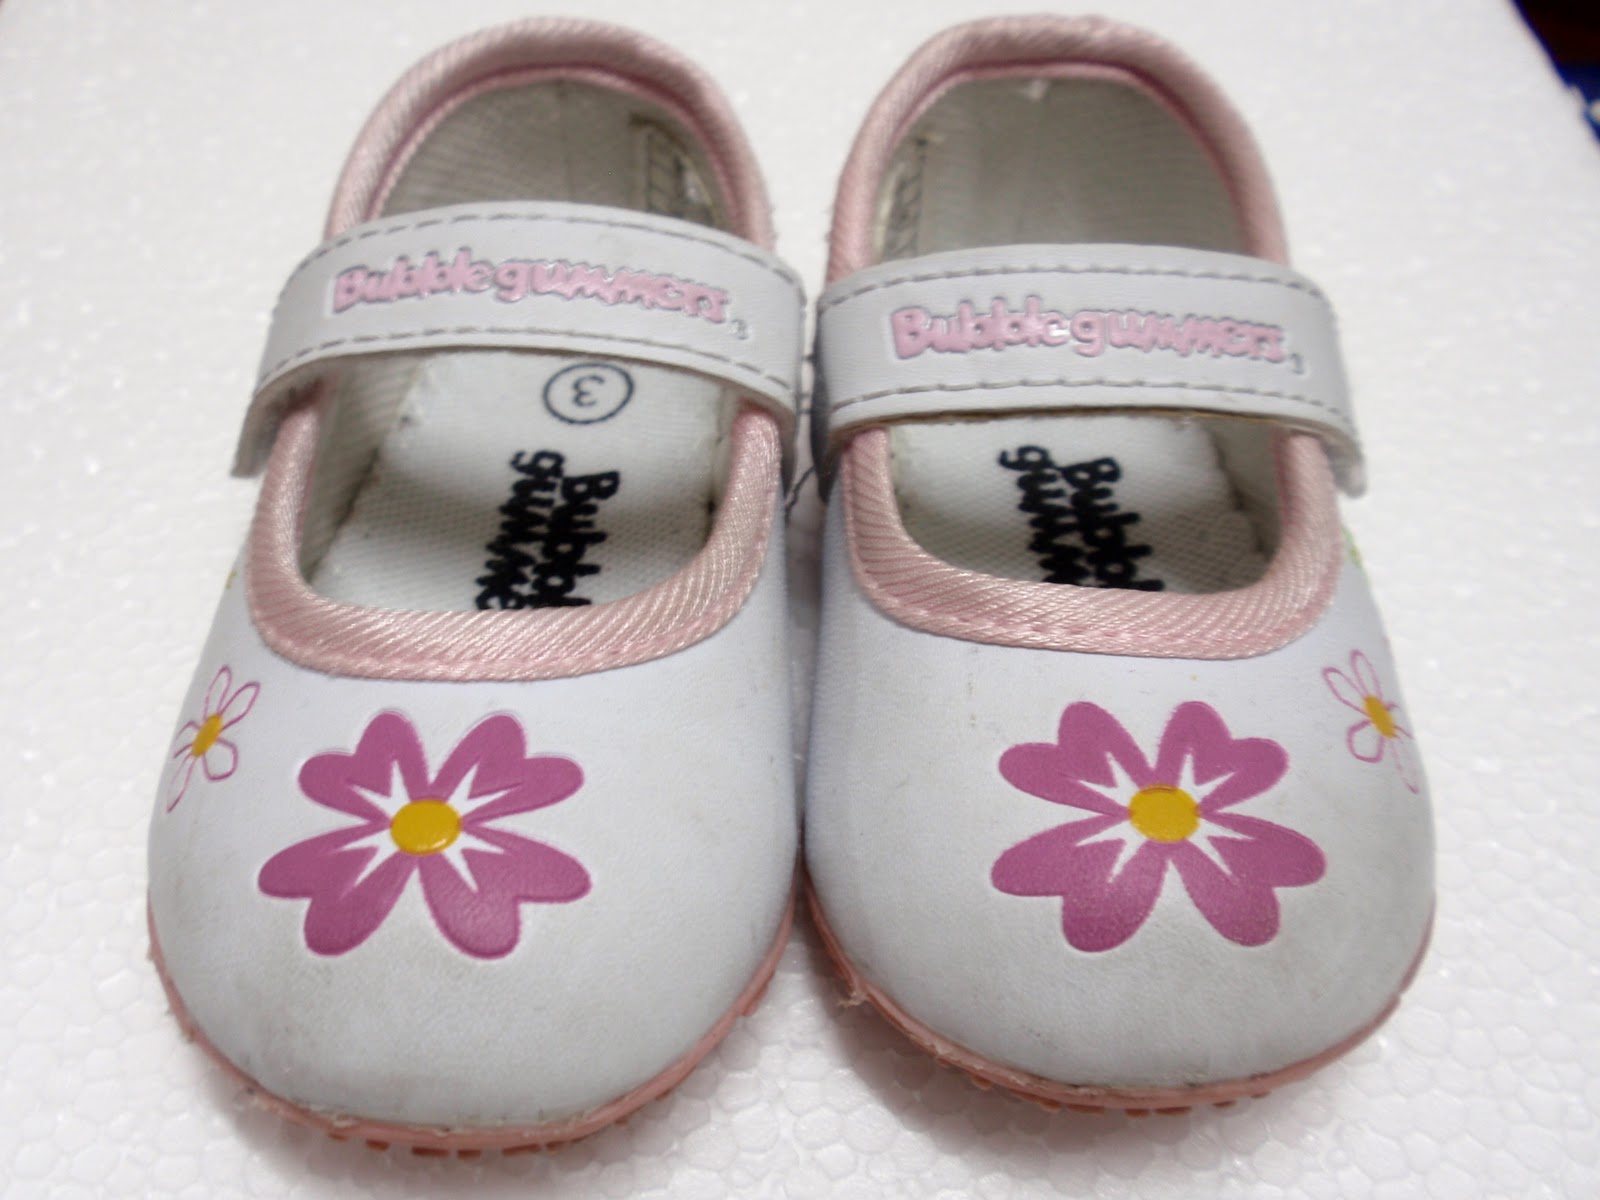 Bata baby bubbles stylish shoes and sandal for Eid 2013 - fashions addres